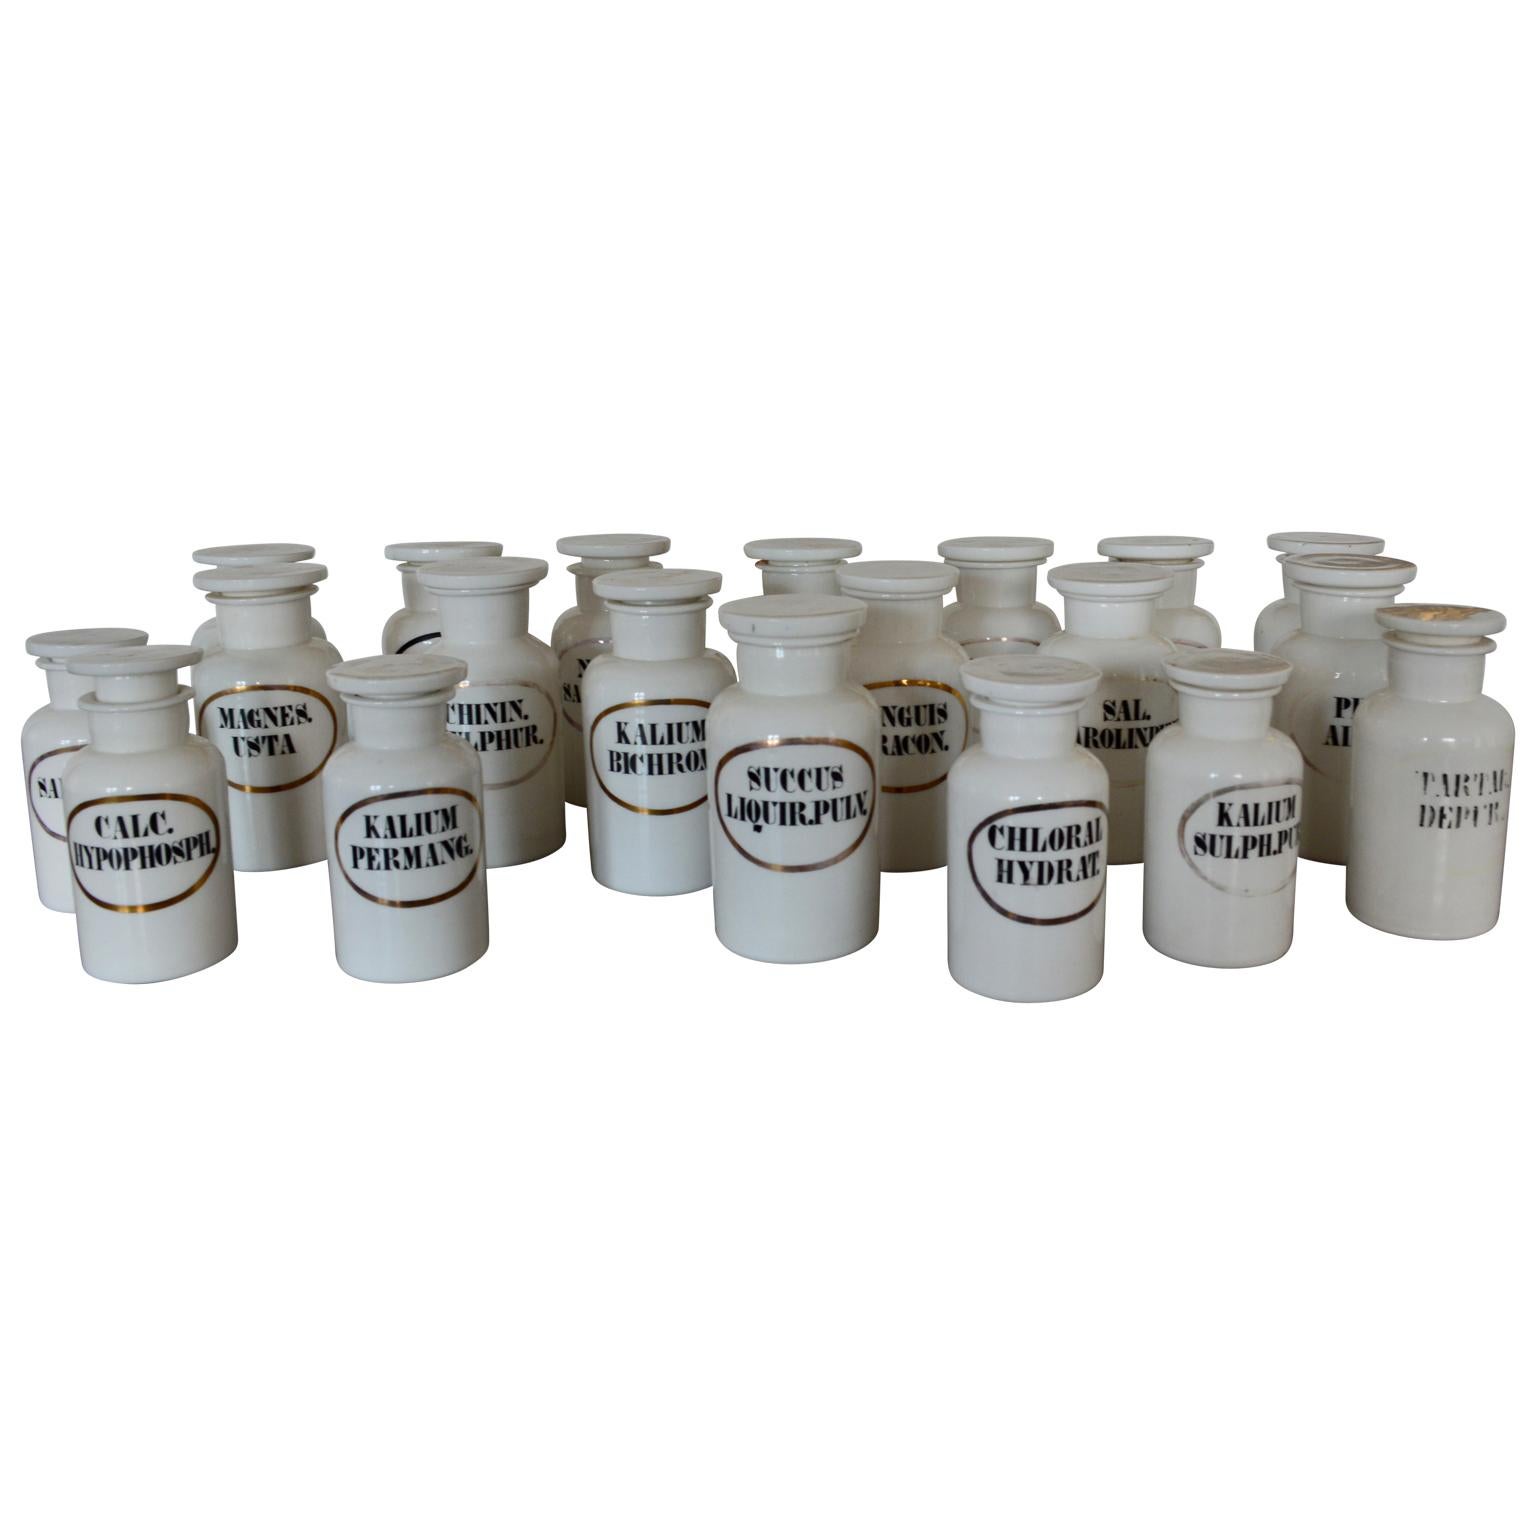 Collection of 20 opaline apothecary jars from the 19th century.
Collection consists of 14 larger jars and 6 smaller jars.